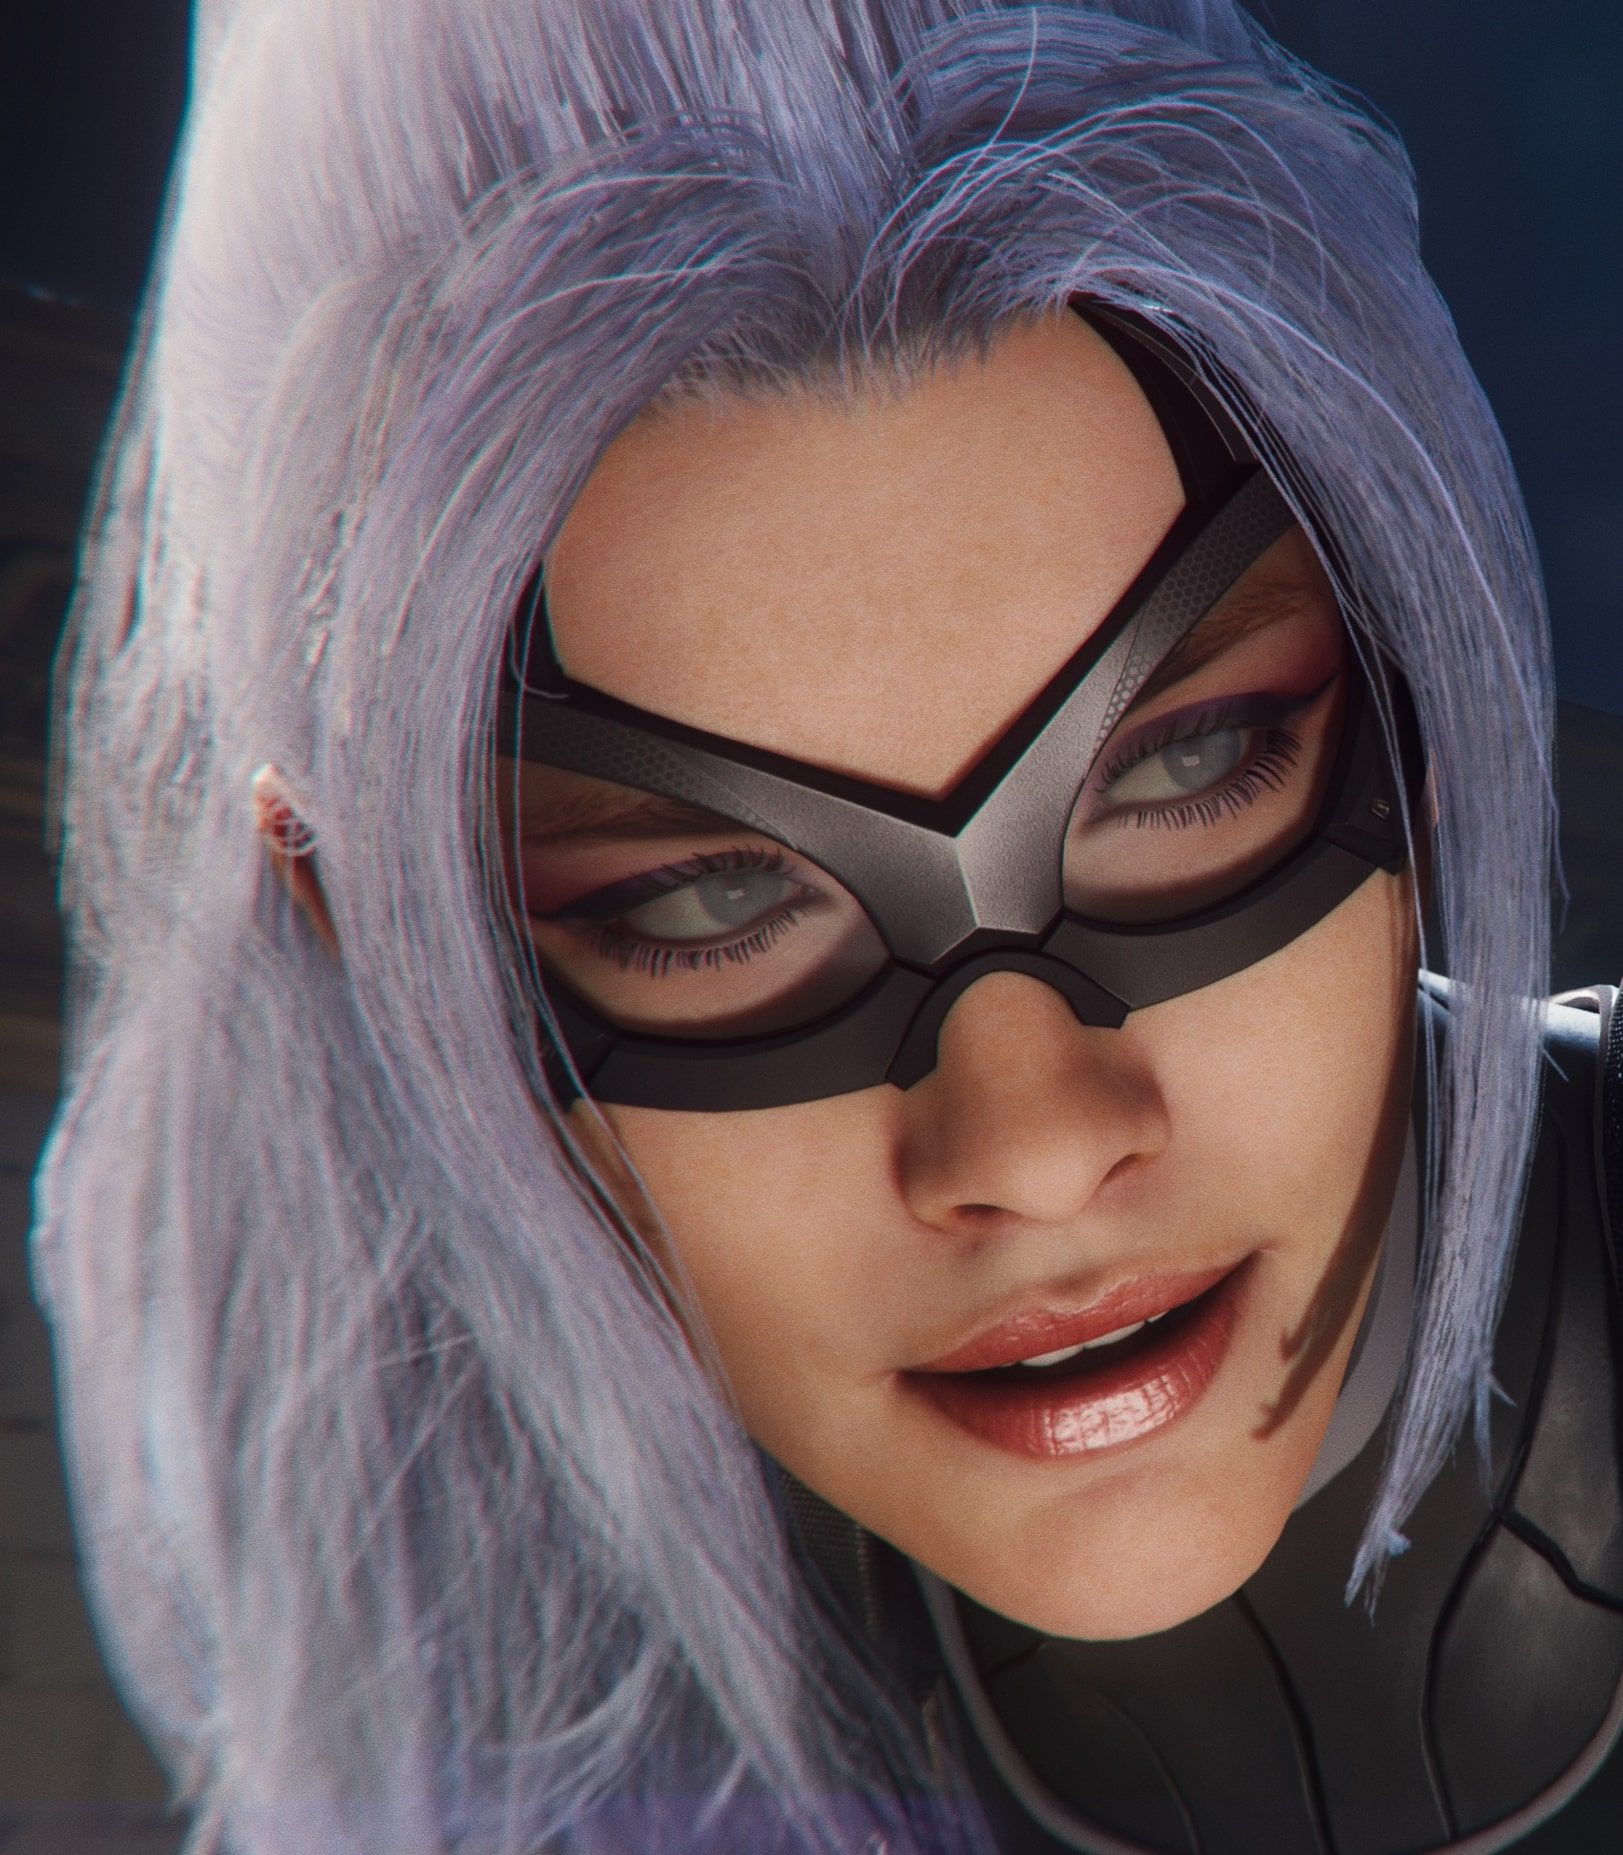 Black Cat from Spider-Man PS4